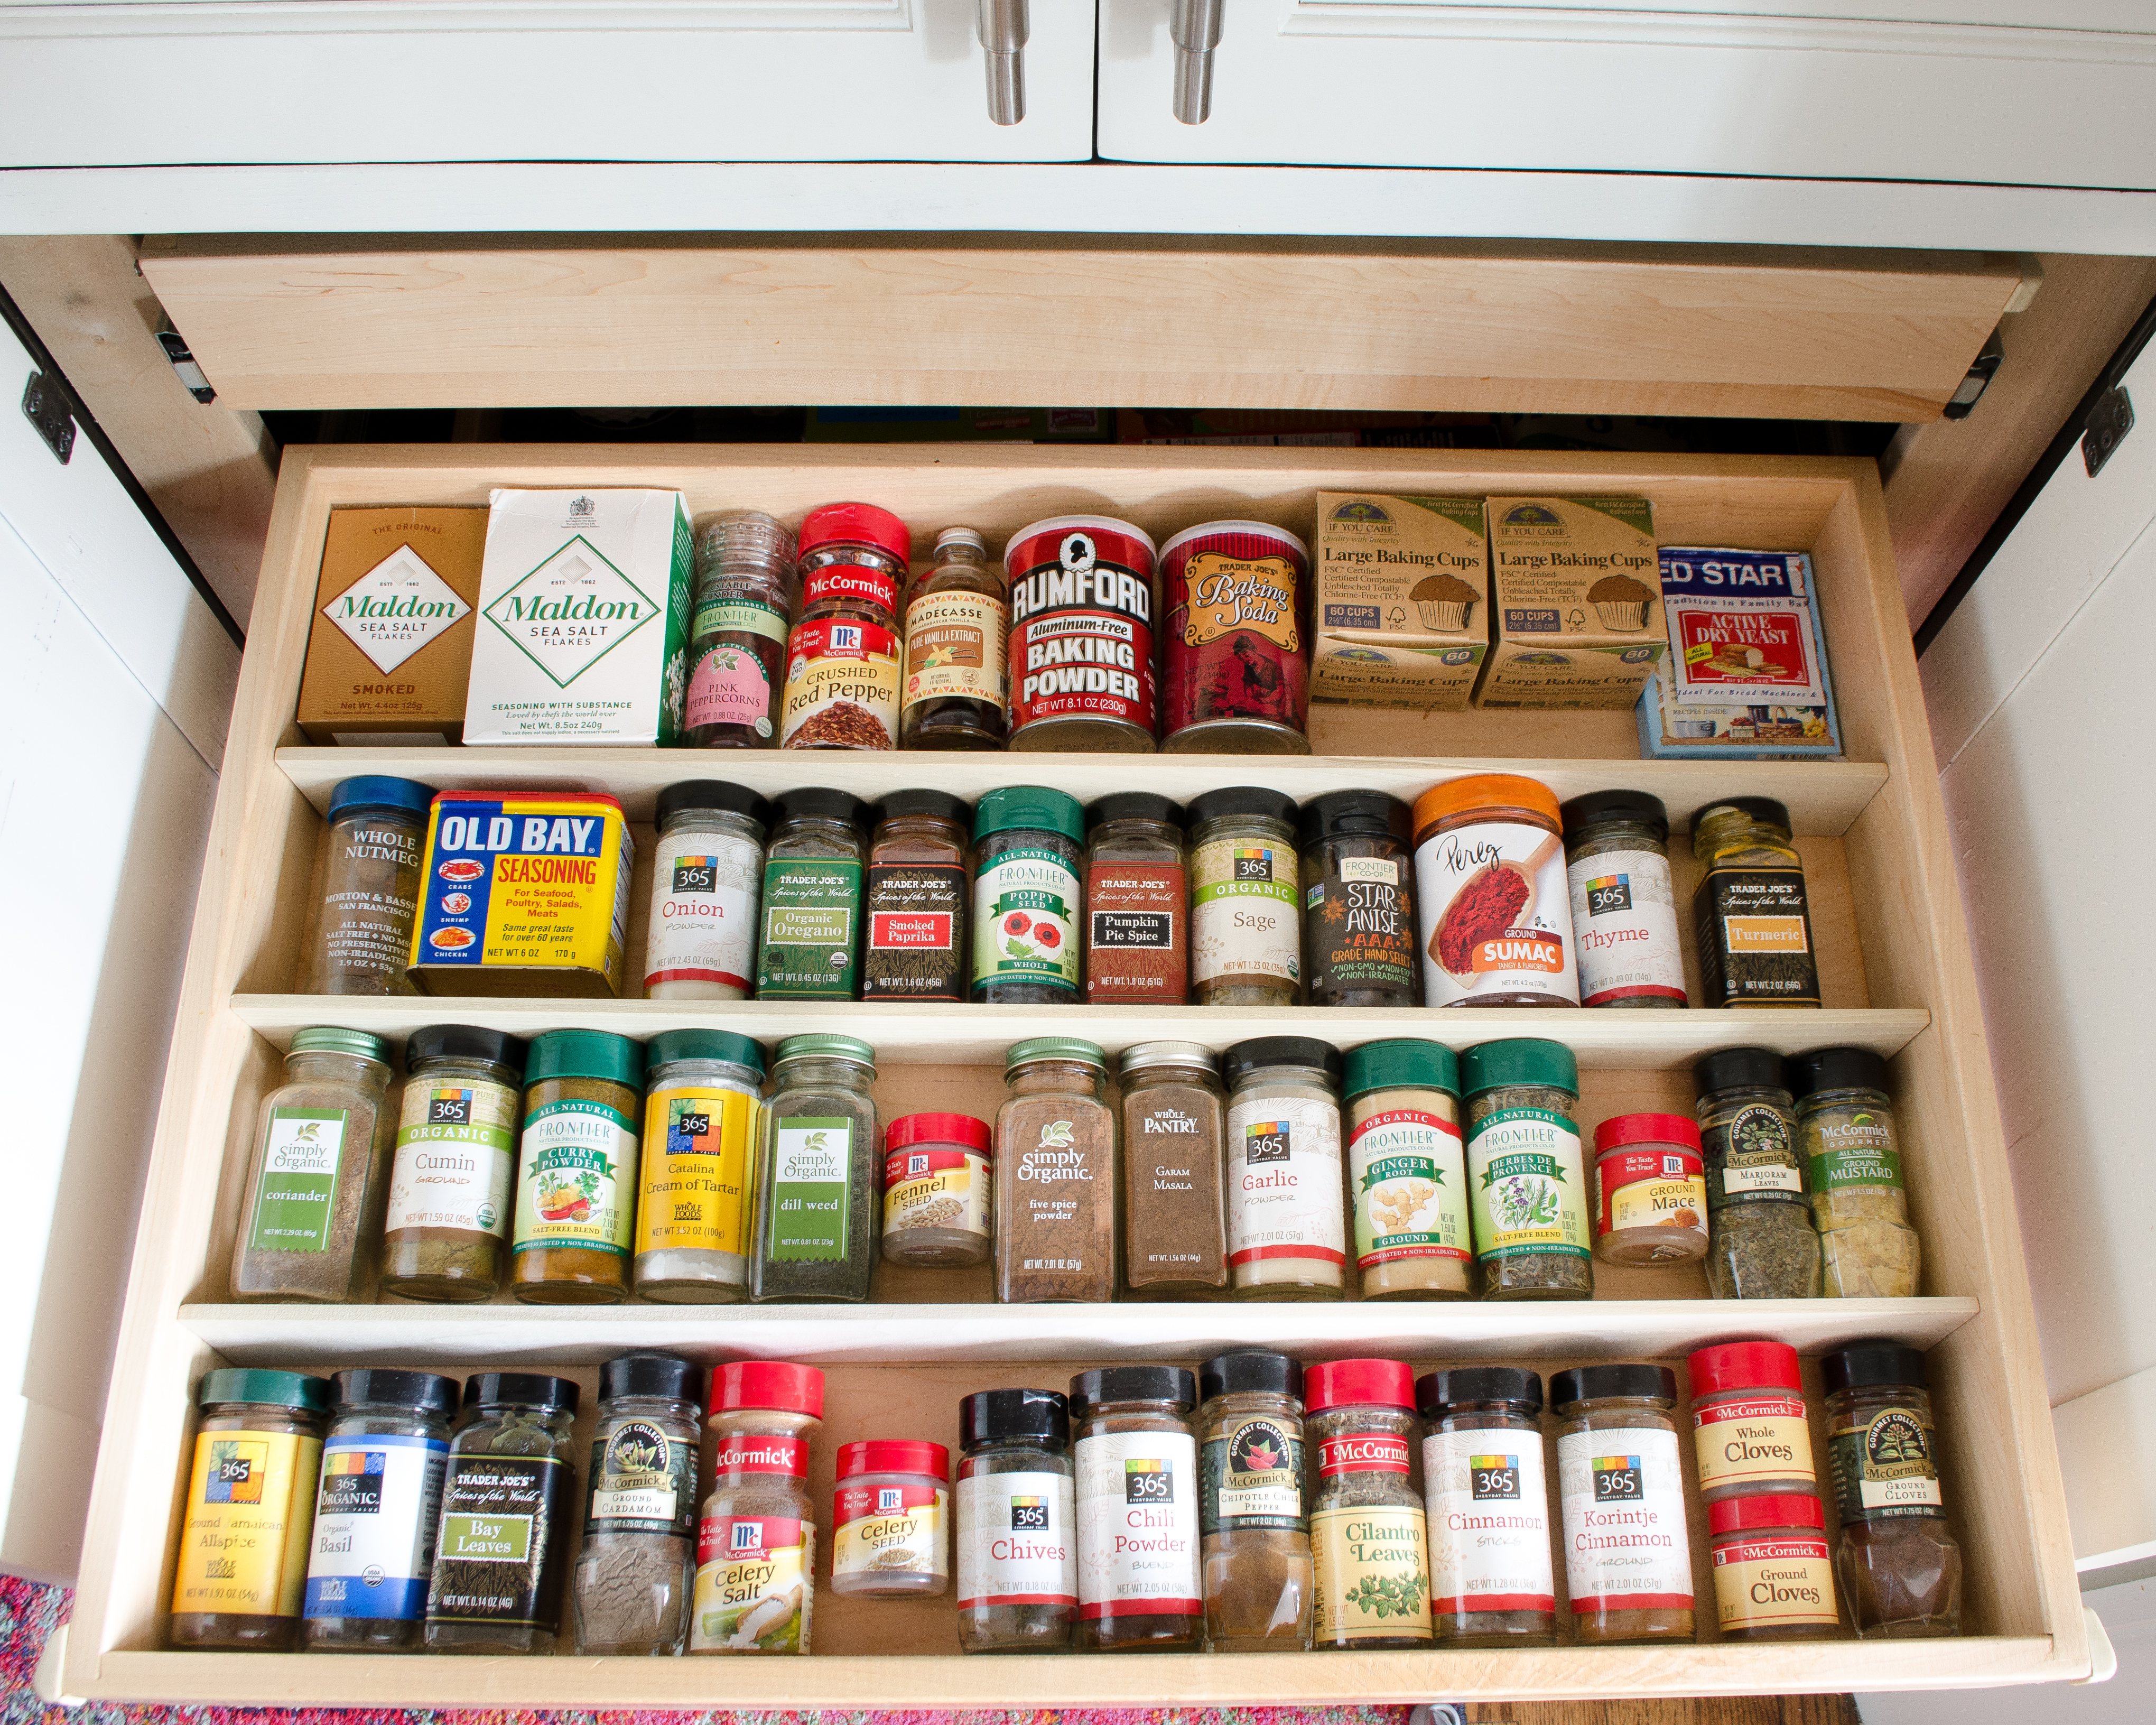 How to Organize Your Spice Rack